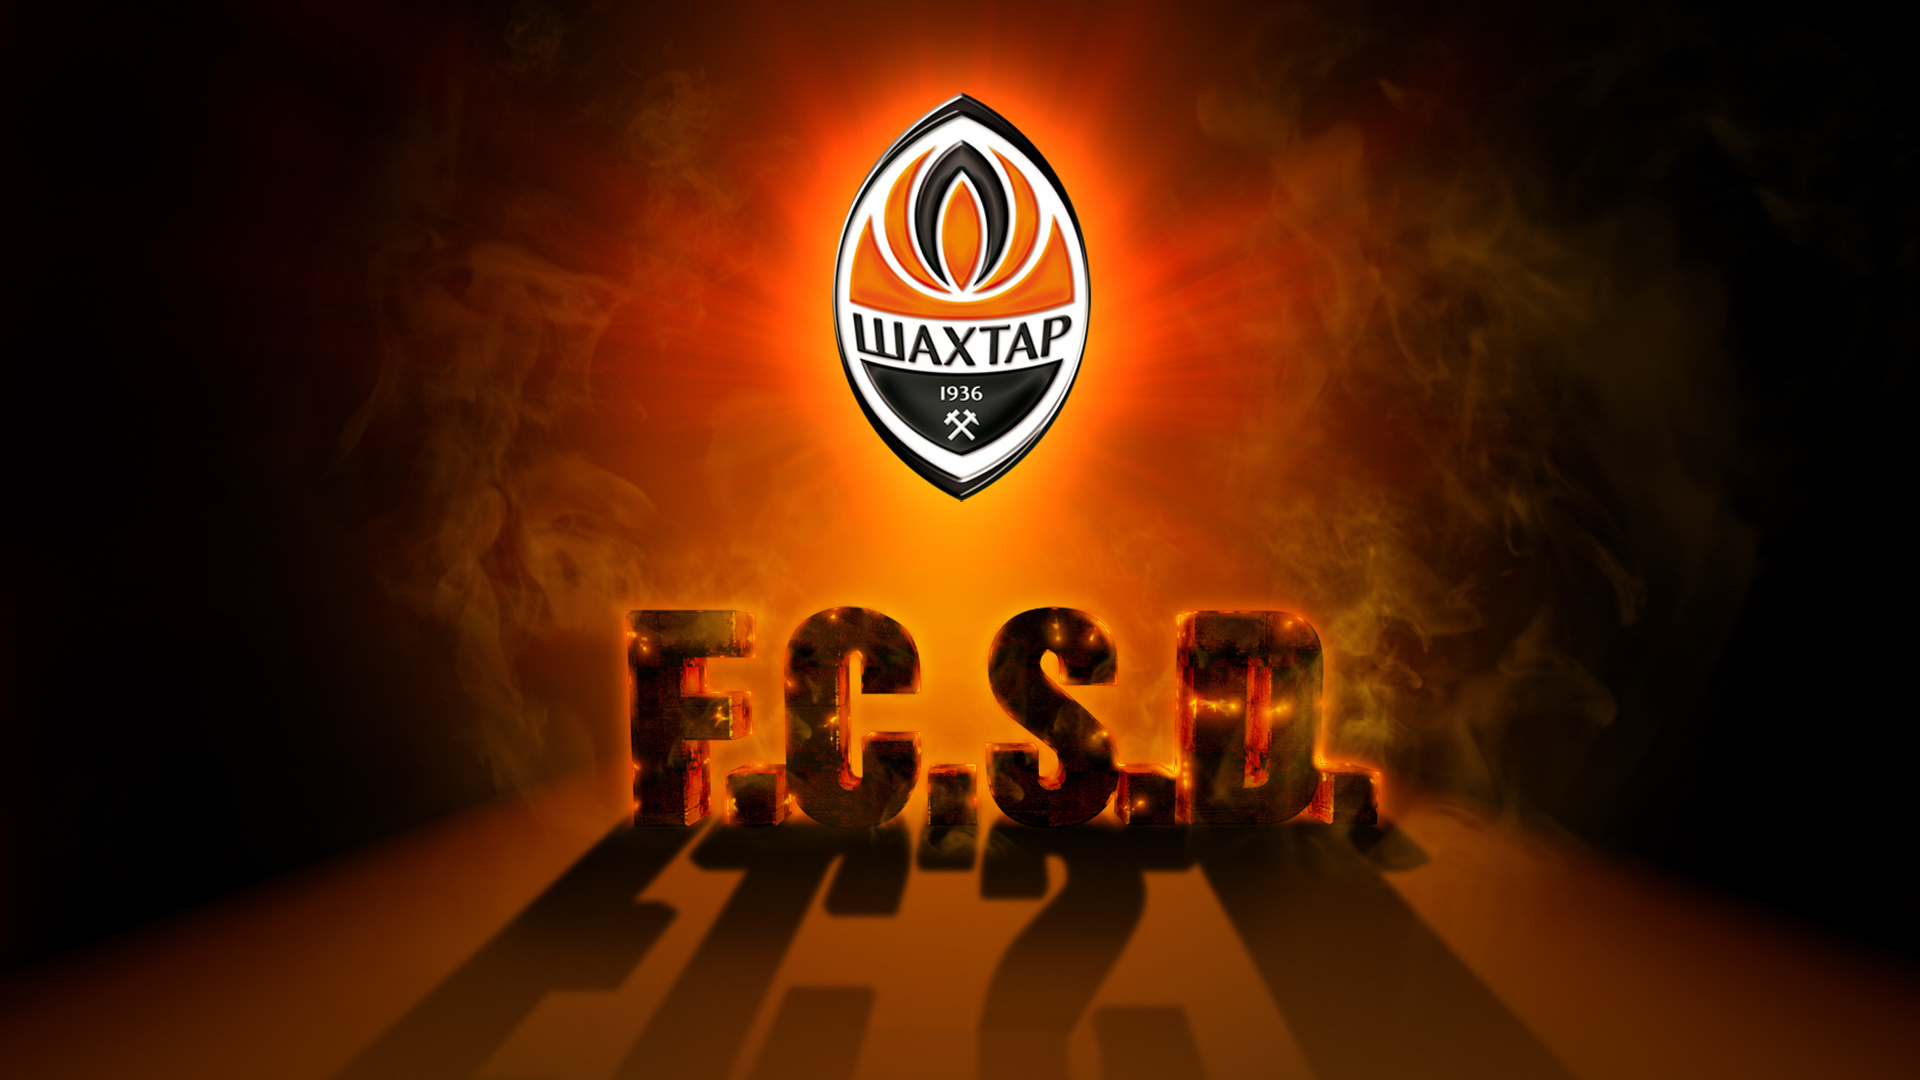 Shakhtar Dosk Football Wallpaper Background And Picture